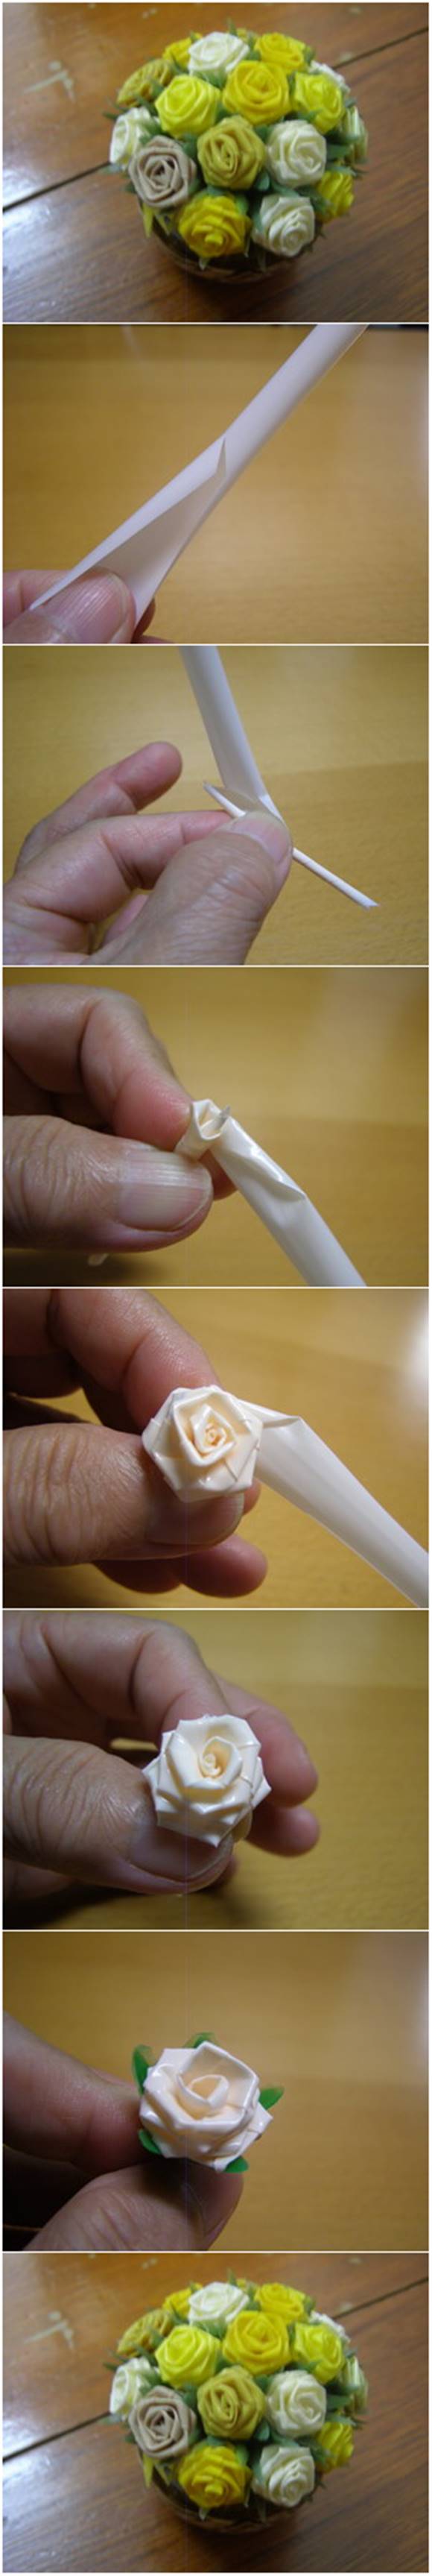 How to Make Beautiful Roses from Drinking Straws